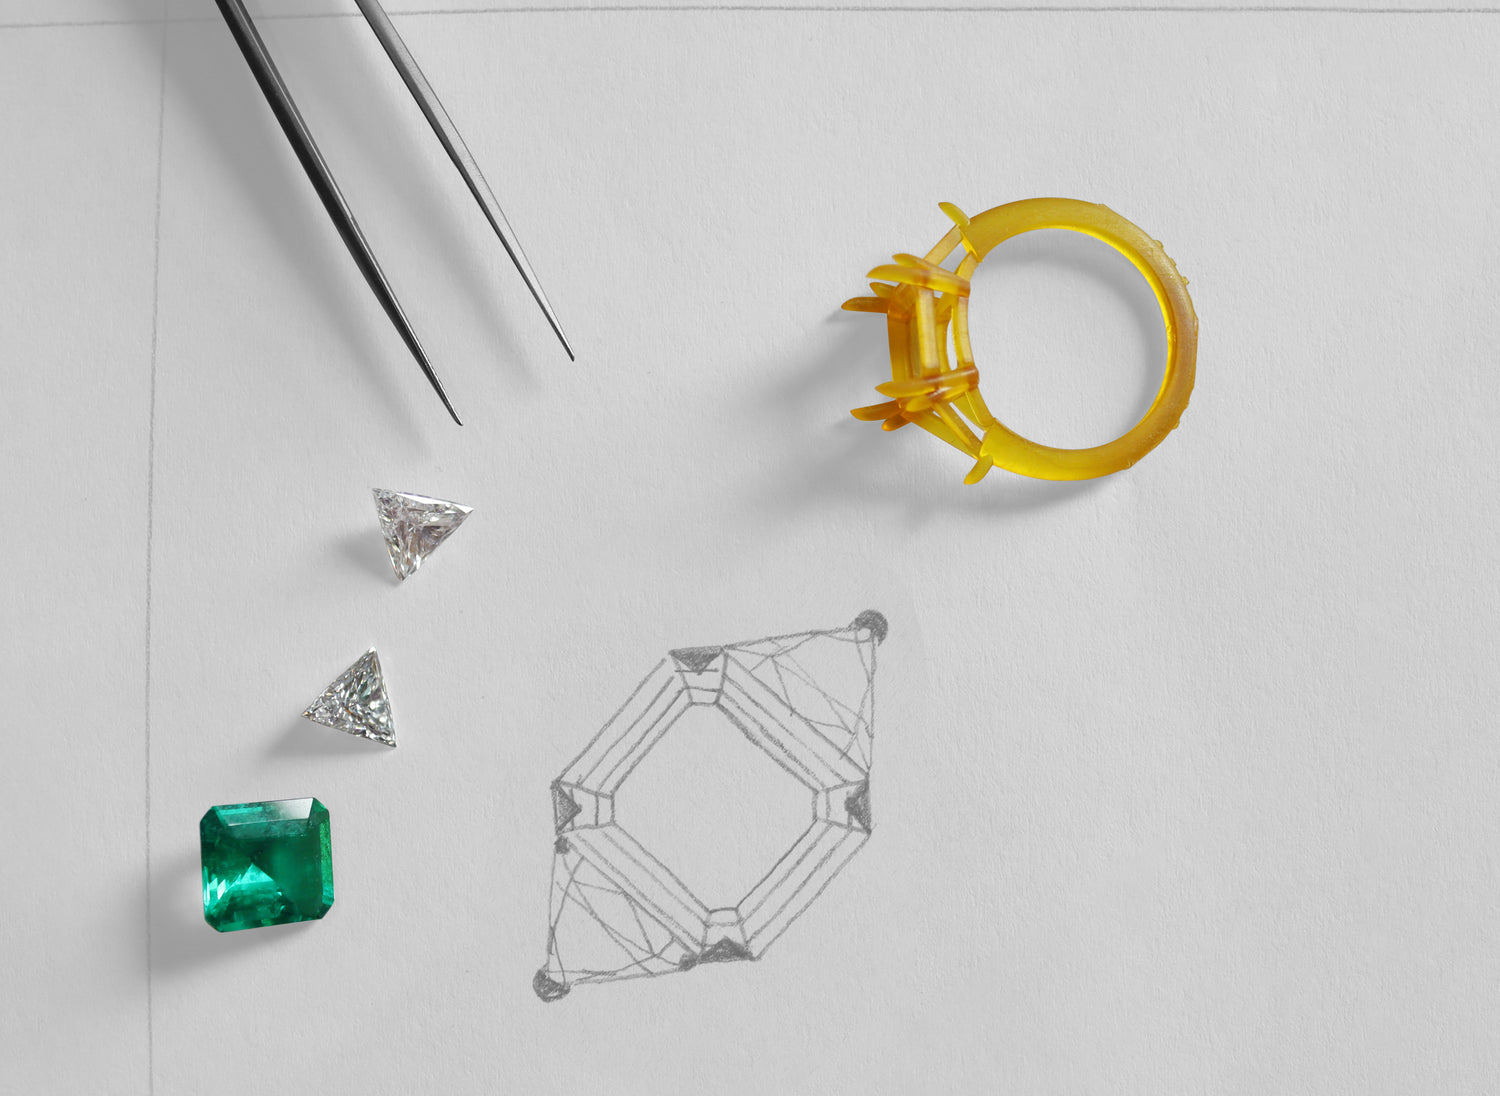 ILA SODHANI Trillion $ Ring design shown with wax 3D printed model and hand sourced stones.